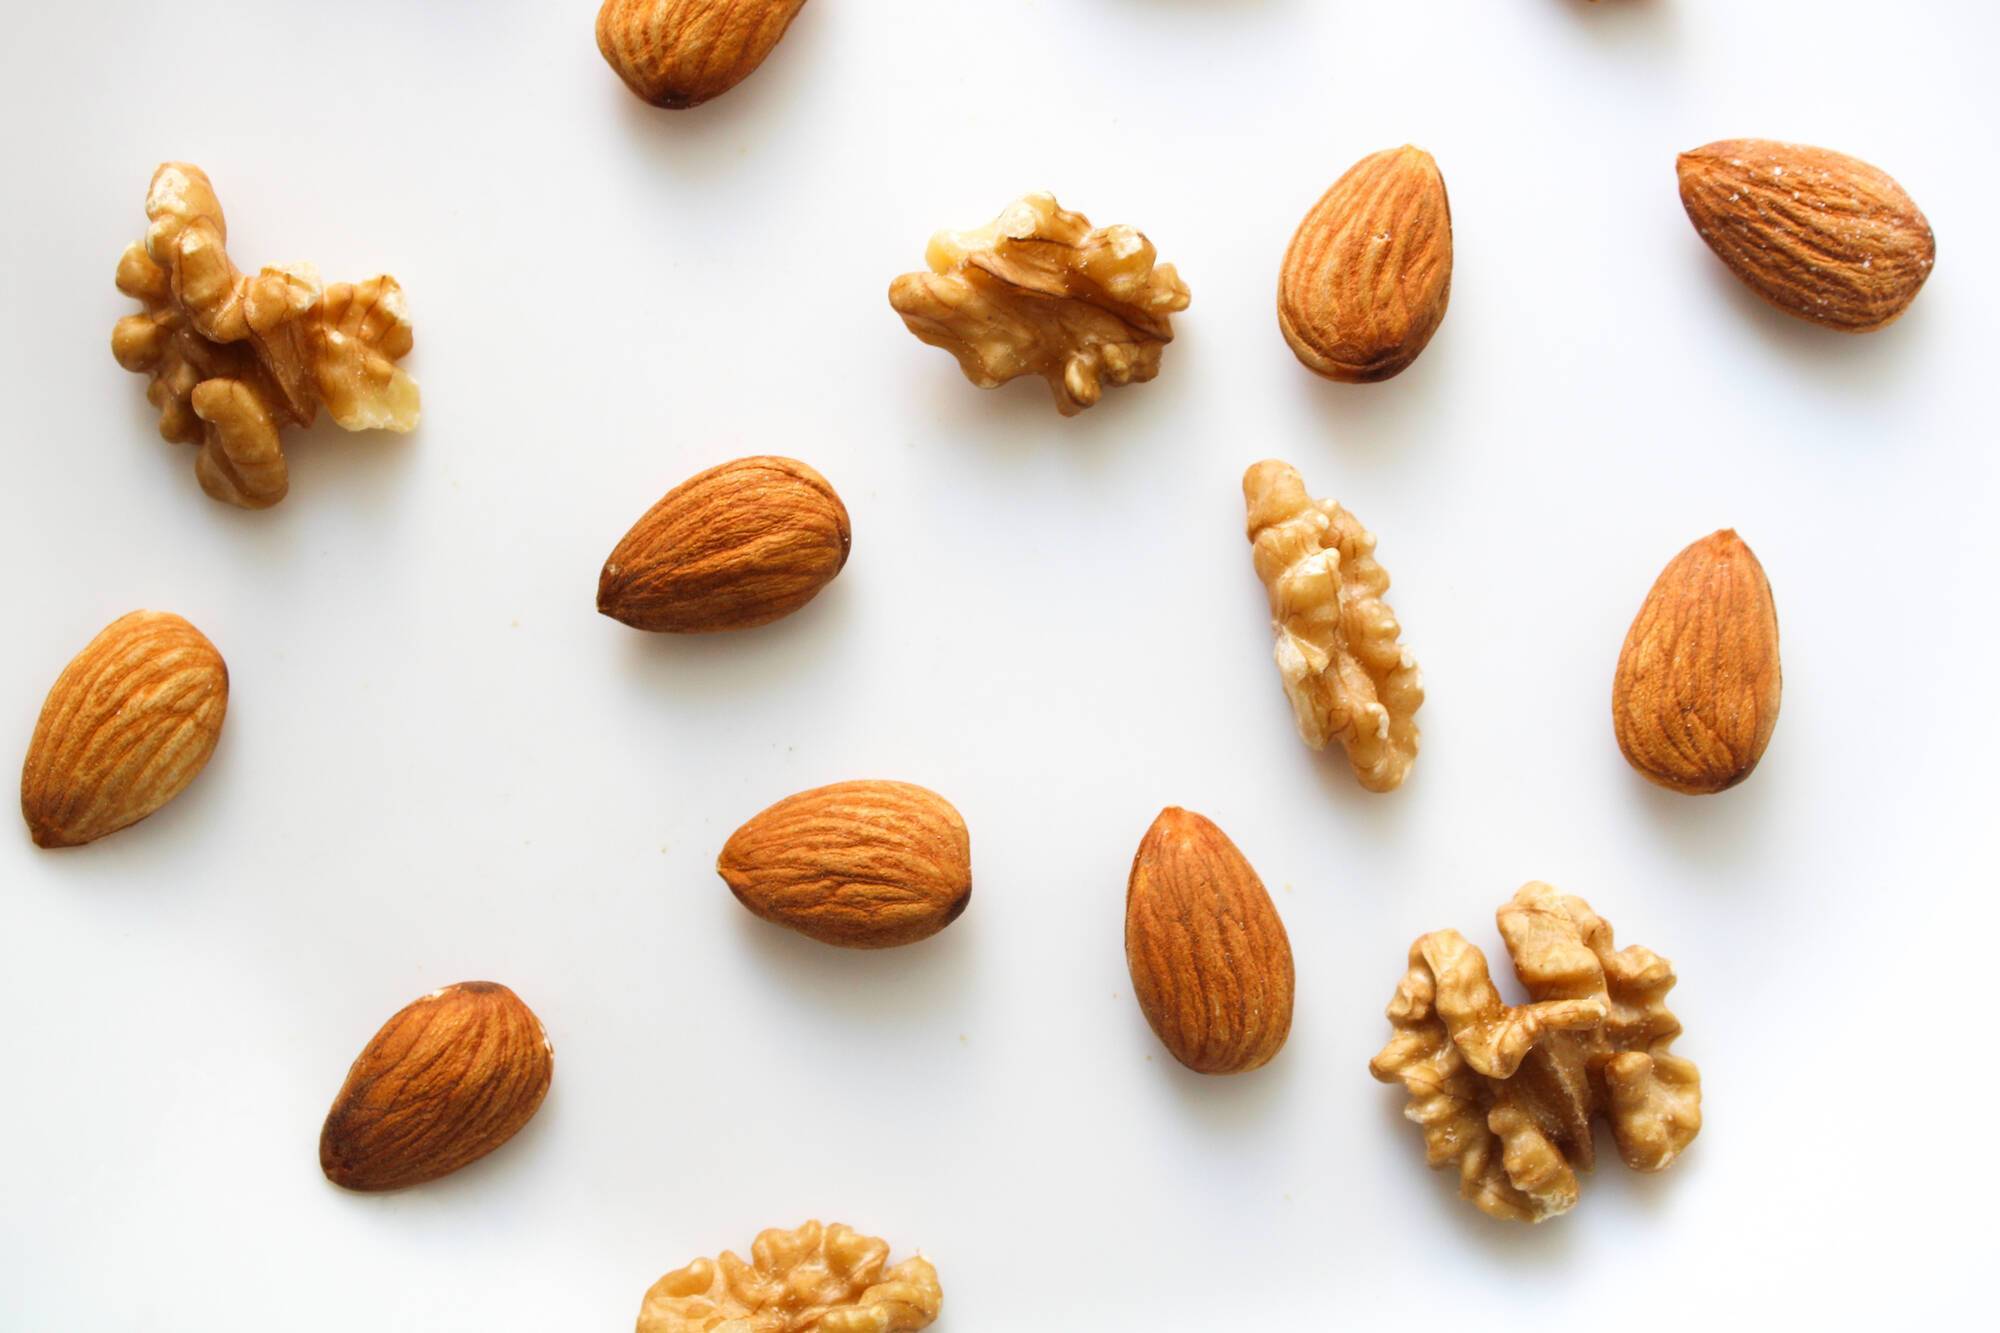 Walnuts or almonds: experts tell which is healthier